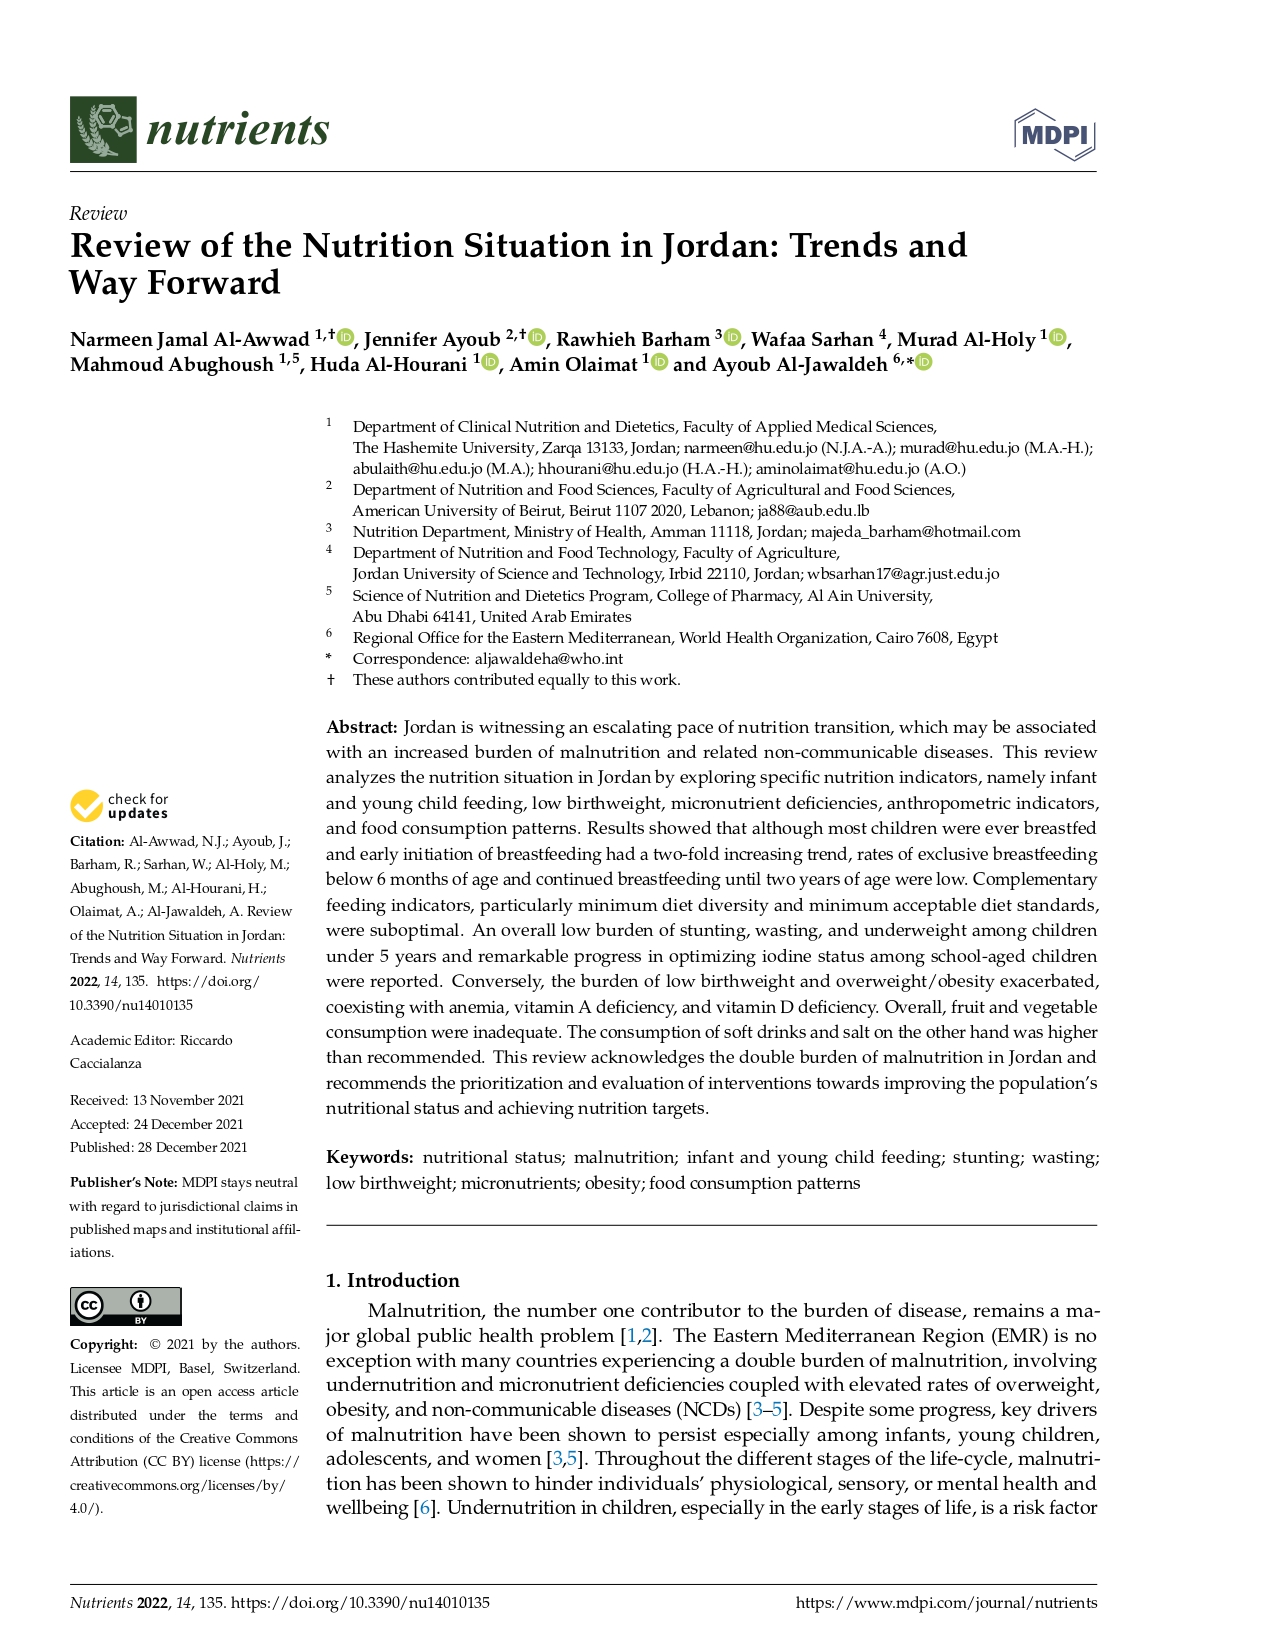 review_of_the_nutrition_situation_in_jordan_trends_and_way_forward